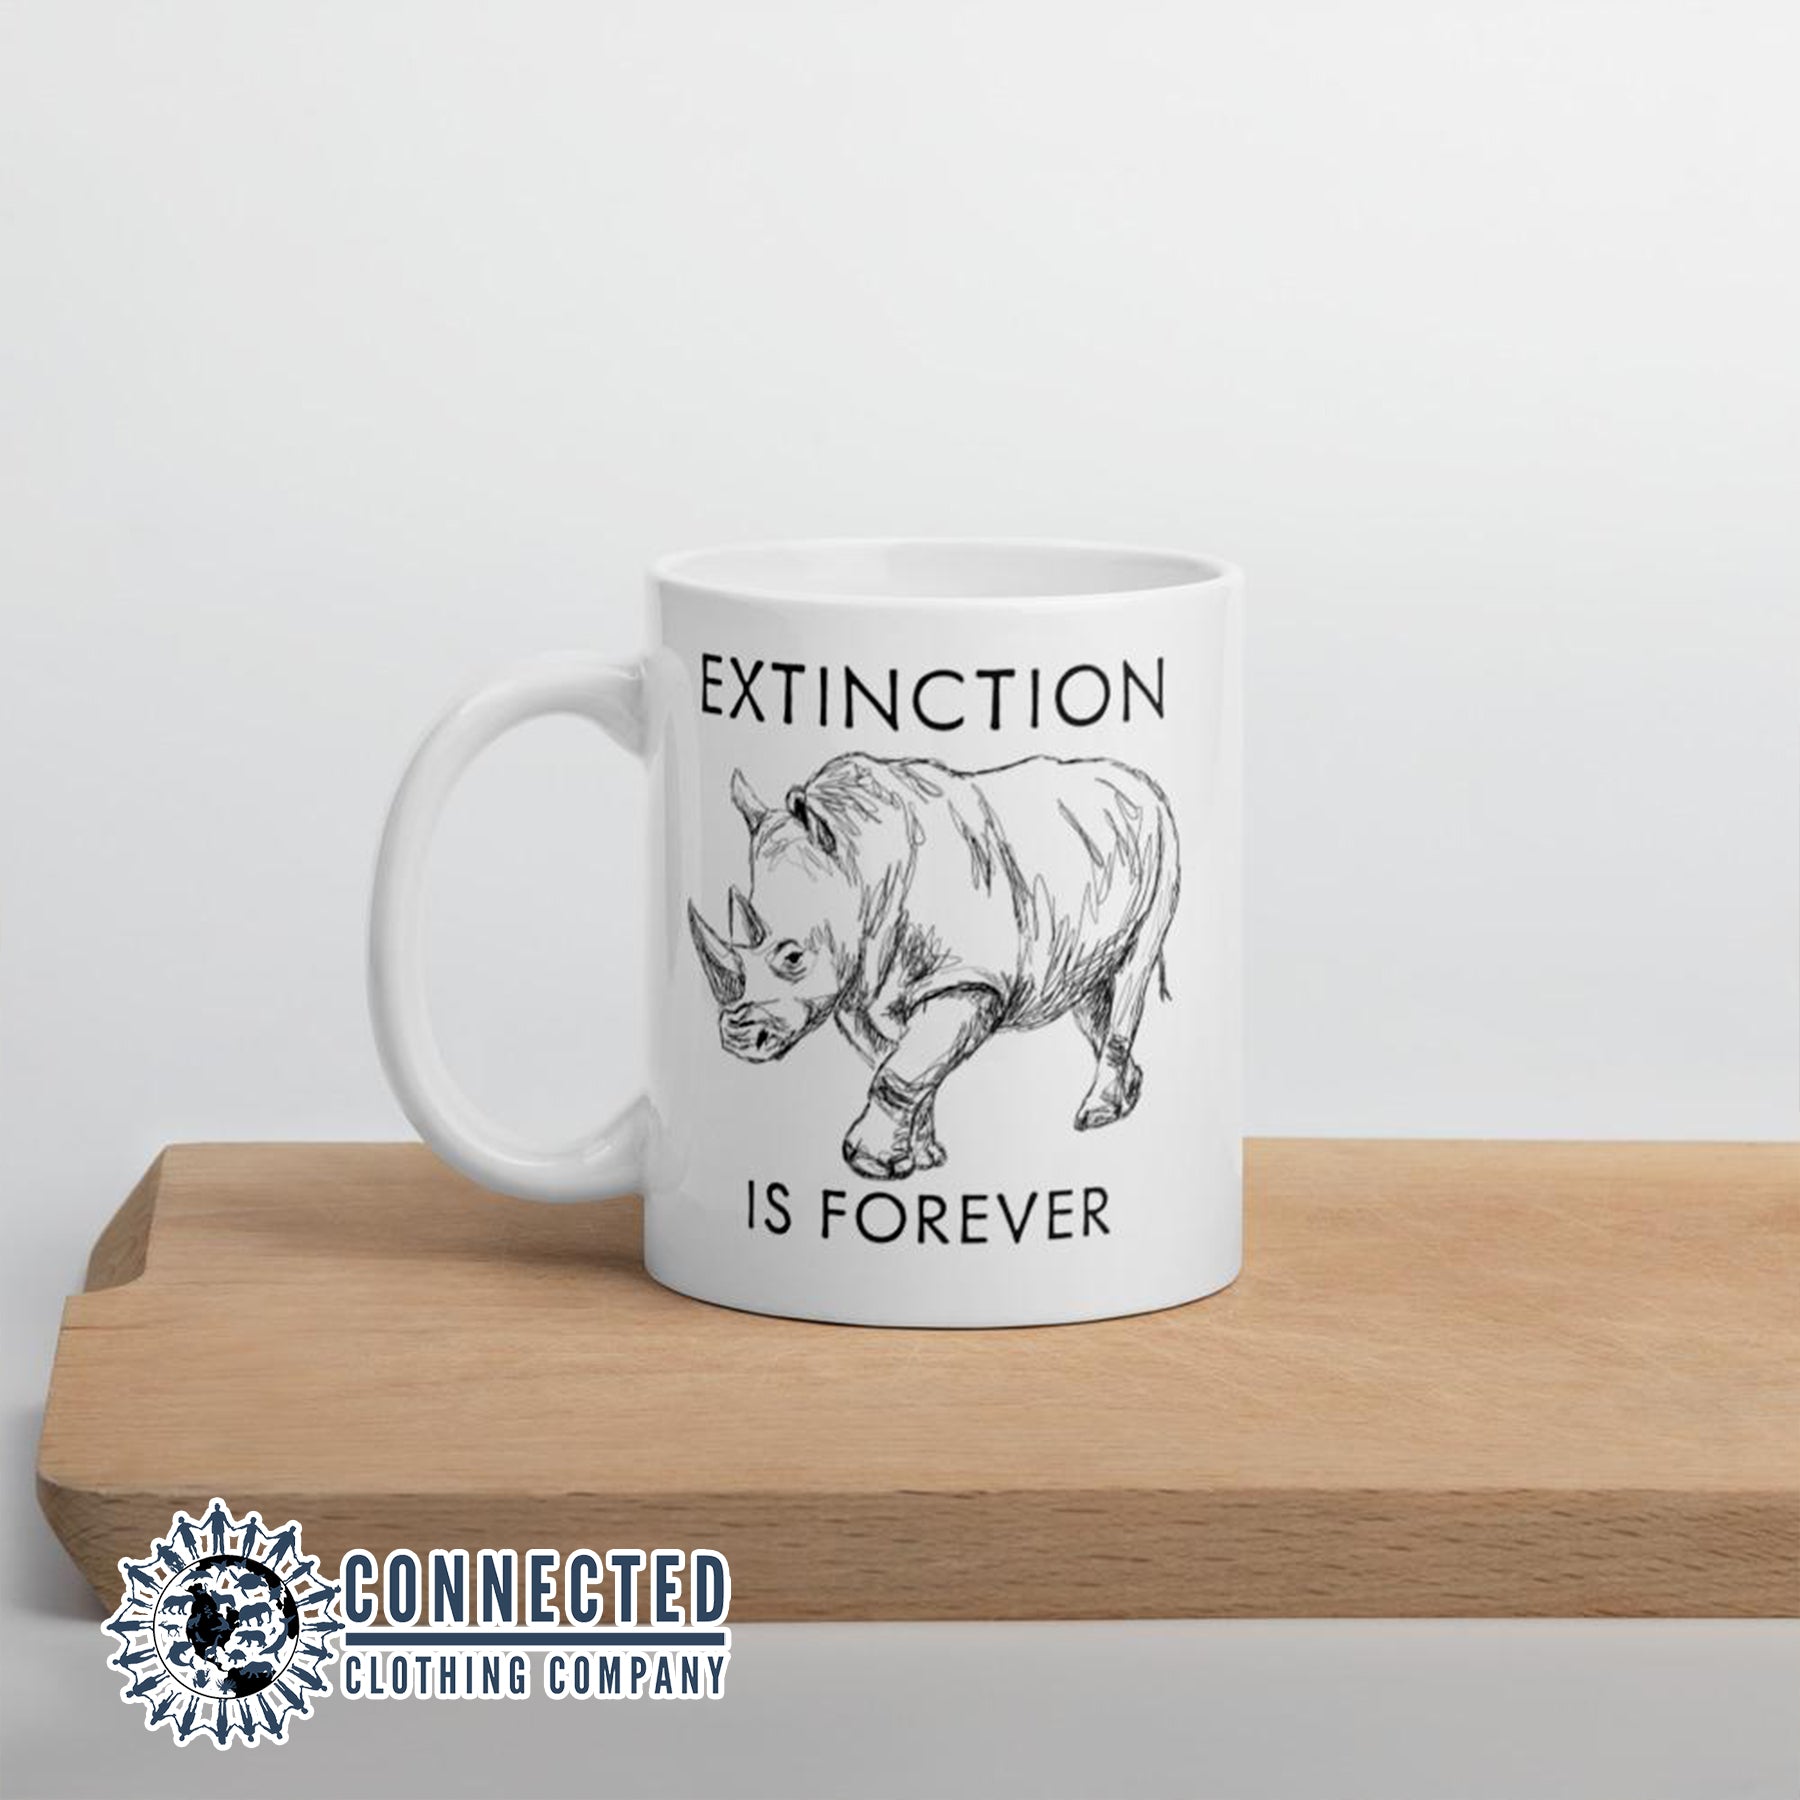 Extinction Is Forever Rhino Classic Mug - Connected Clothing Company - Ethically and Sustainably Made - 10% of profits donated to rhinoceros conservation